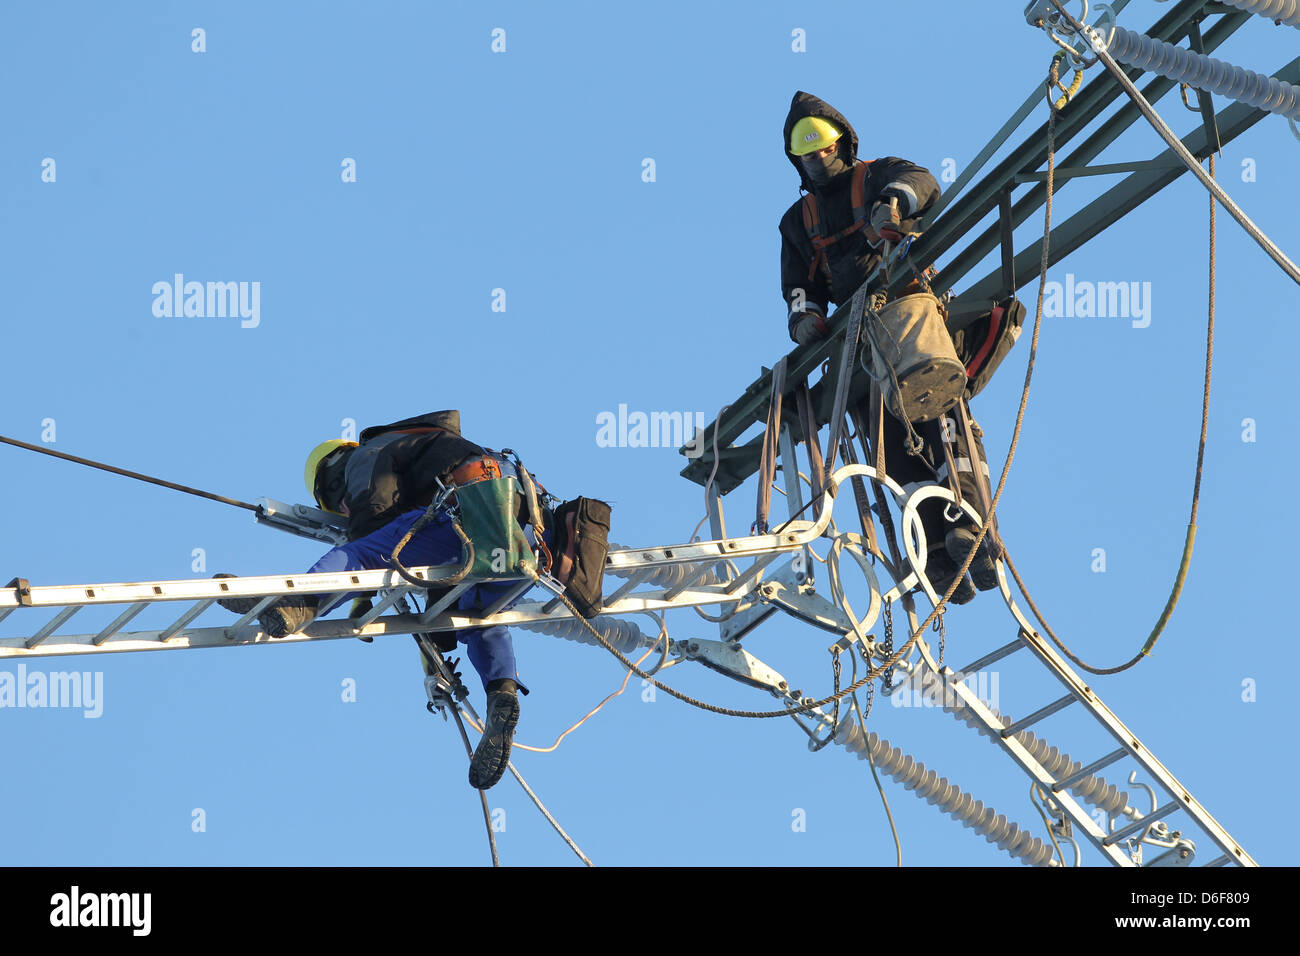 Rendsburg, Germany, workers replace insulators on high voltage pylons Stock Photo